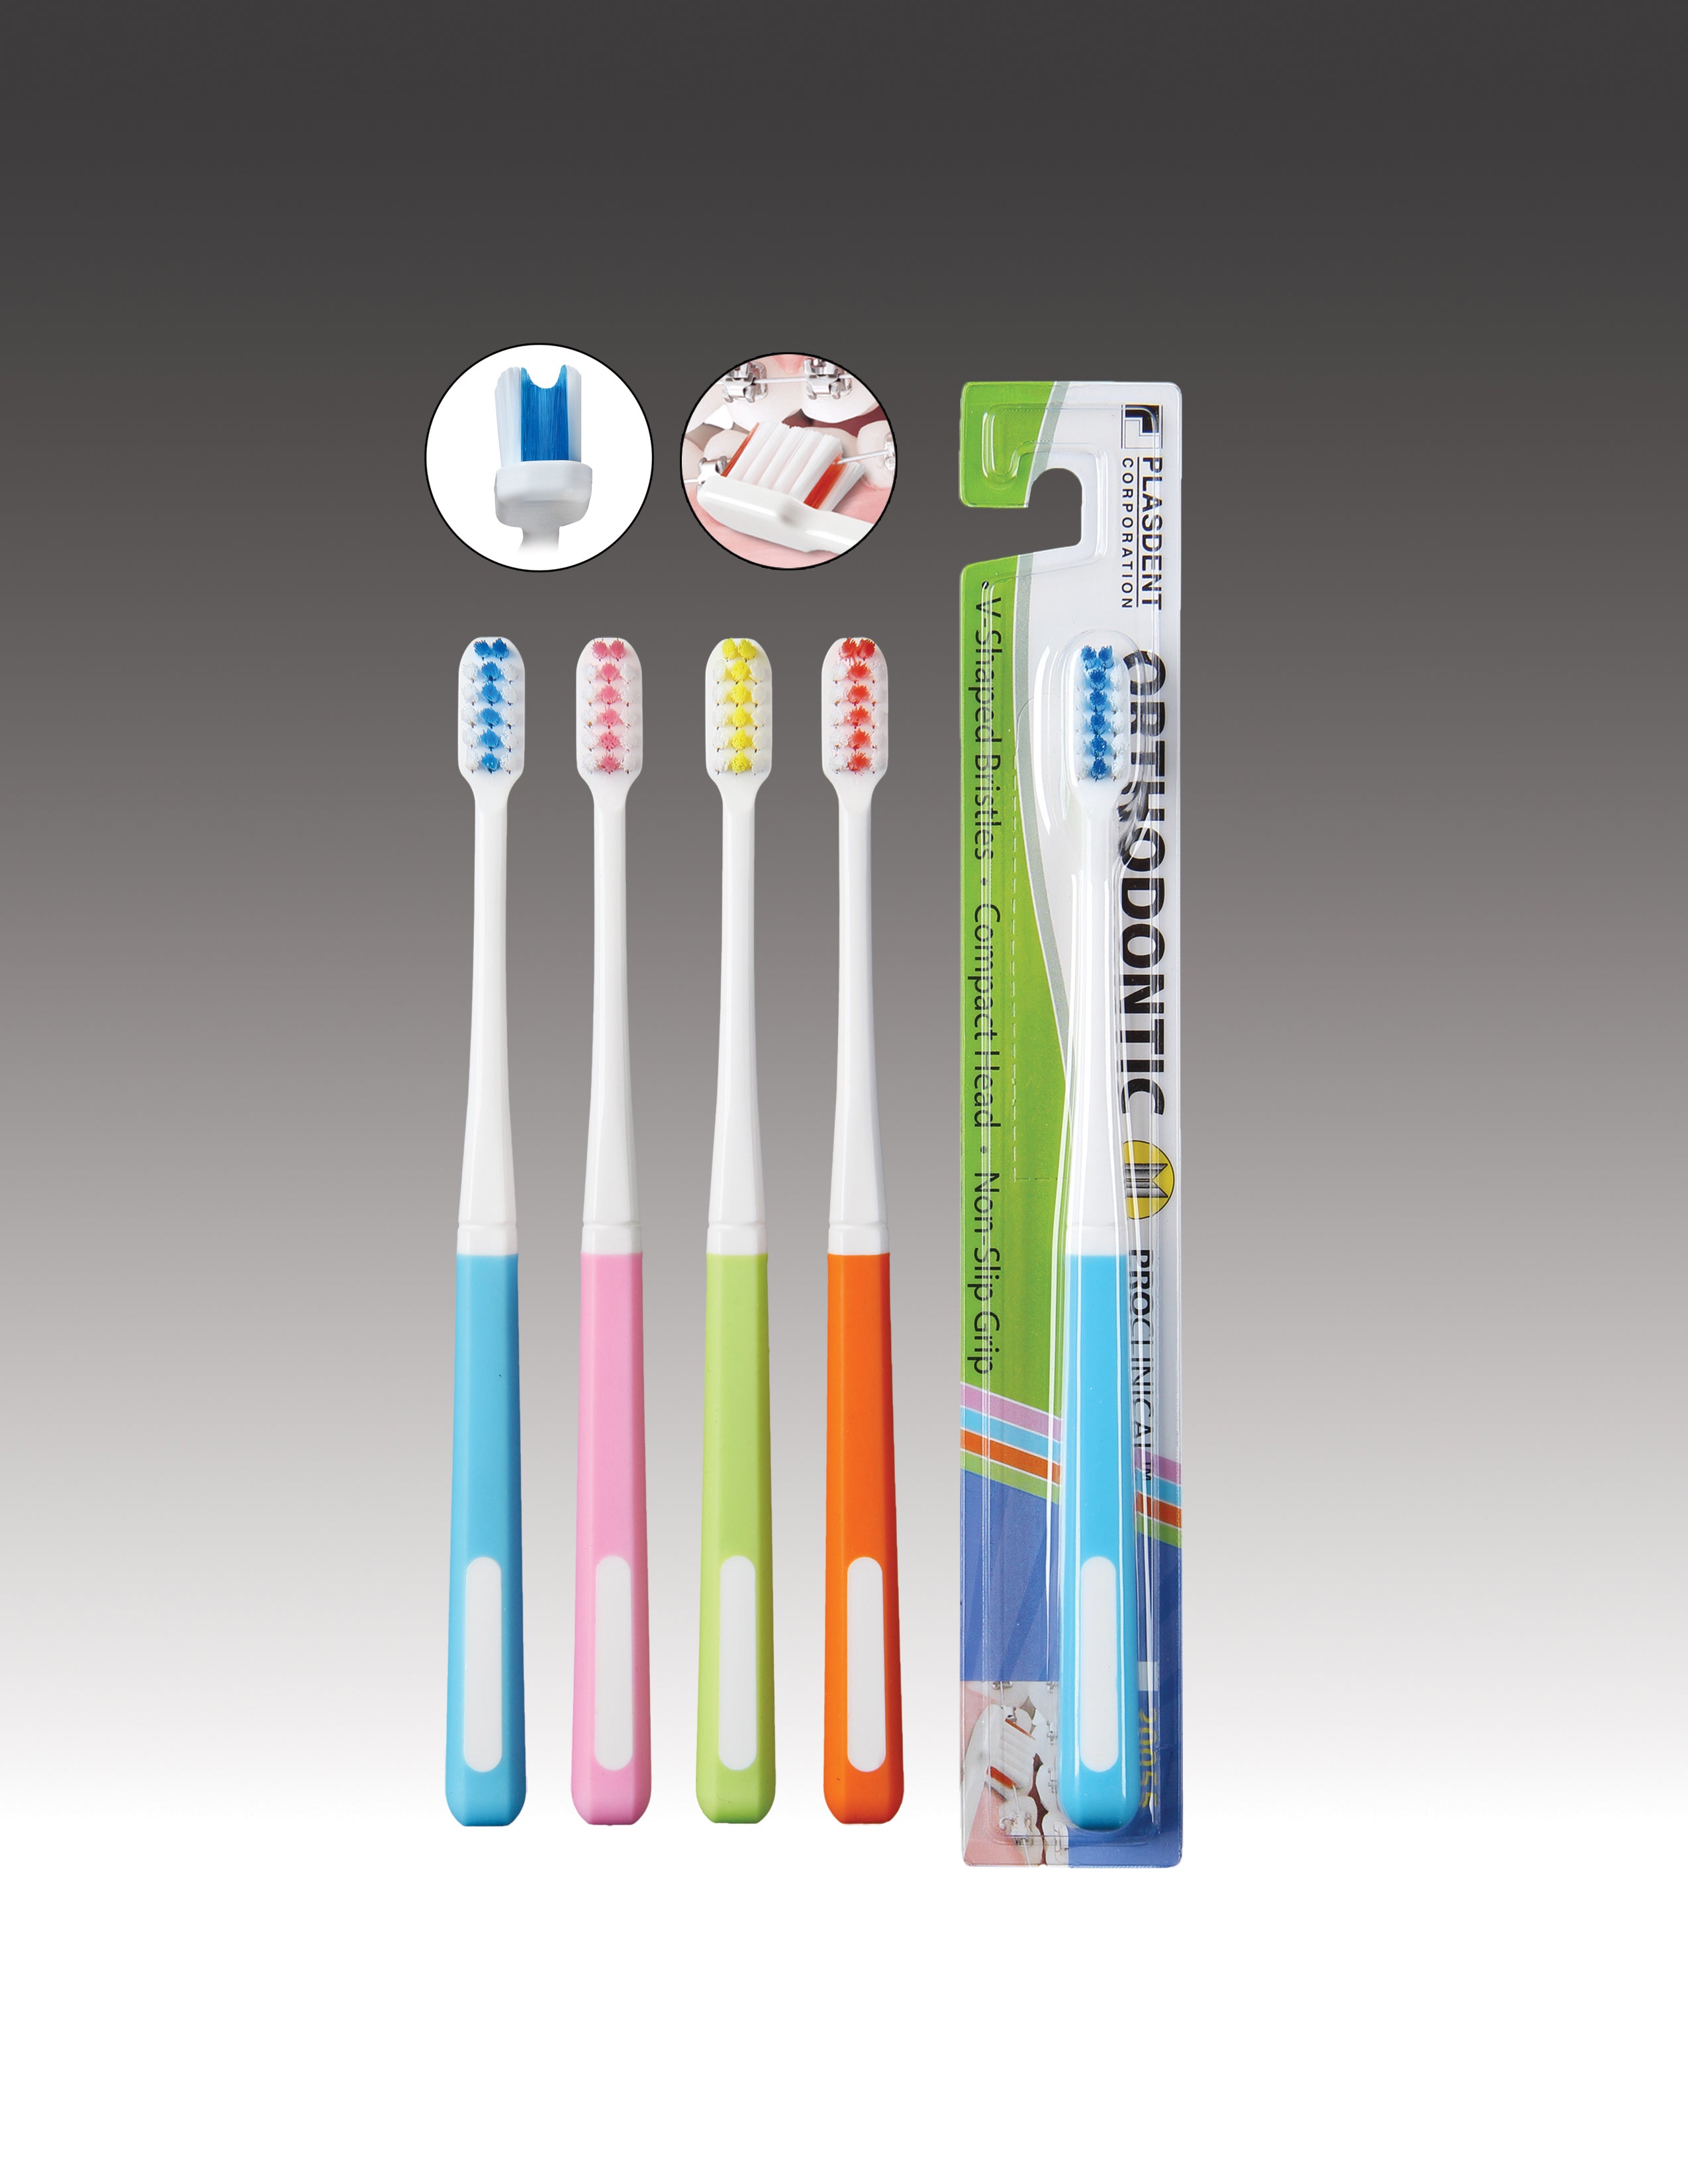 Plasdent Oral Hygiene Products